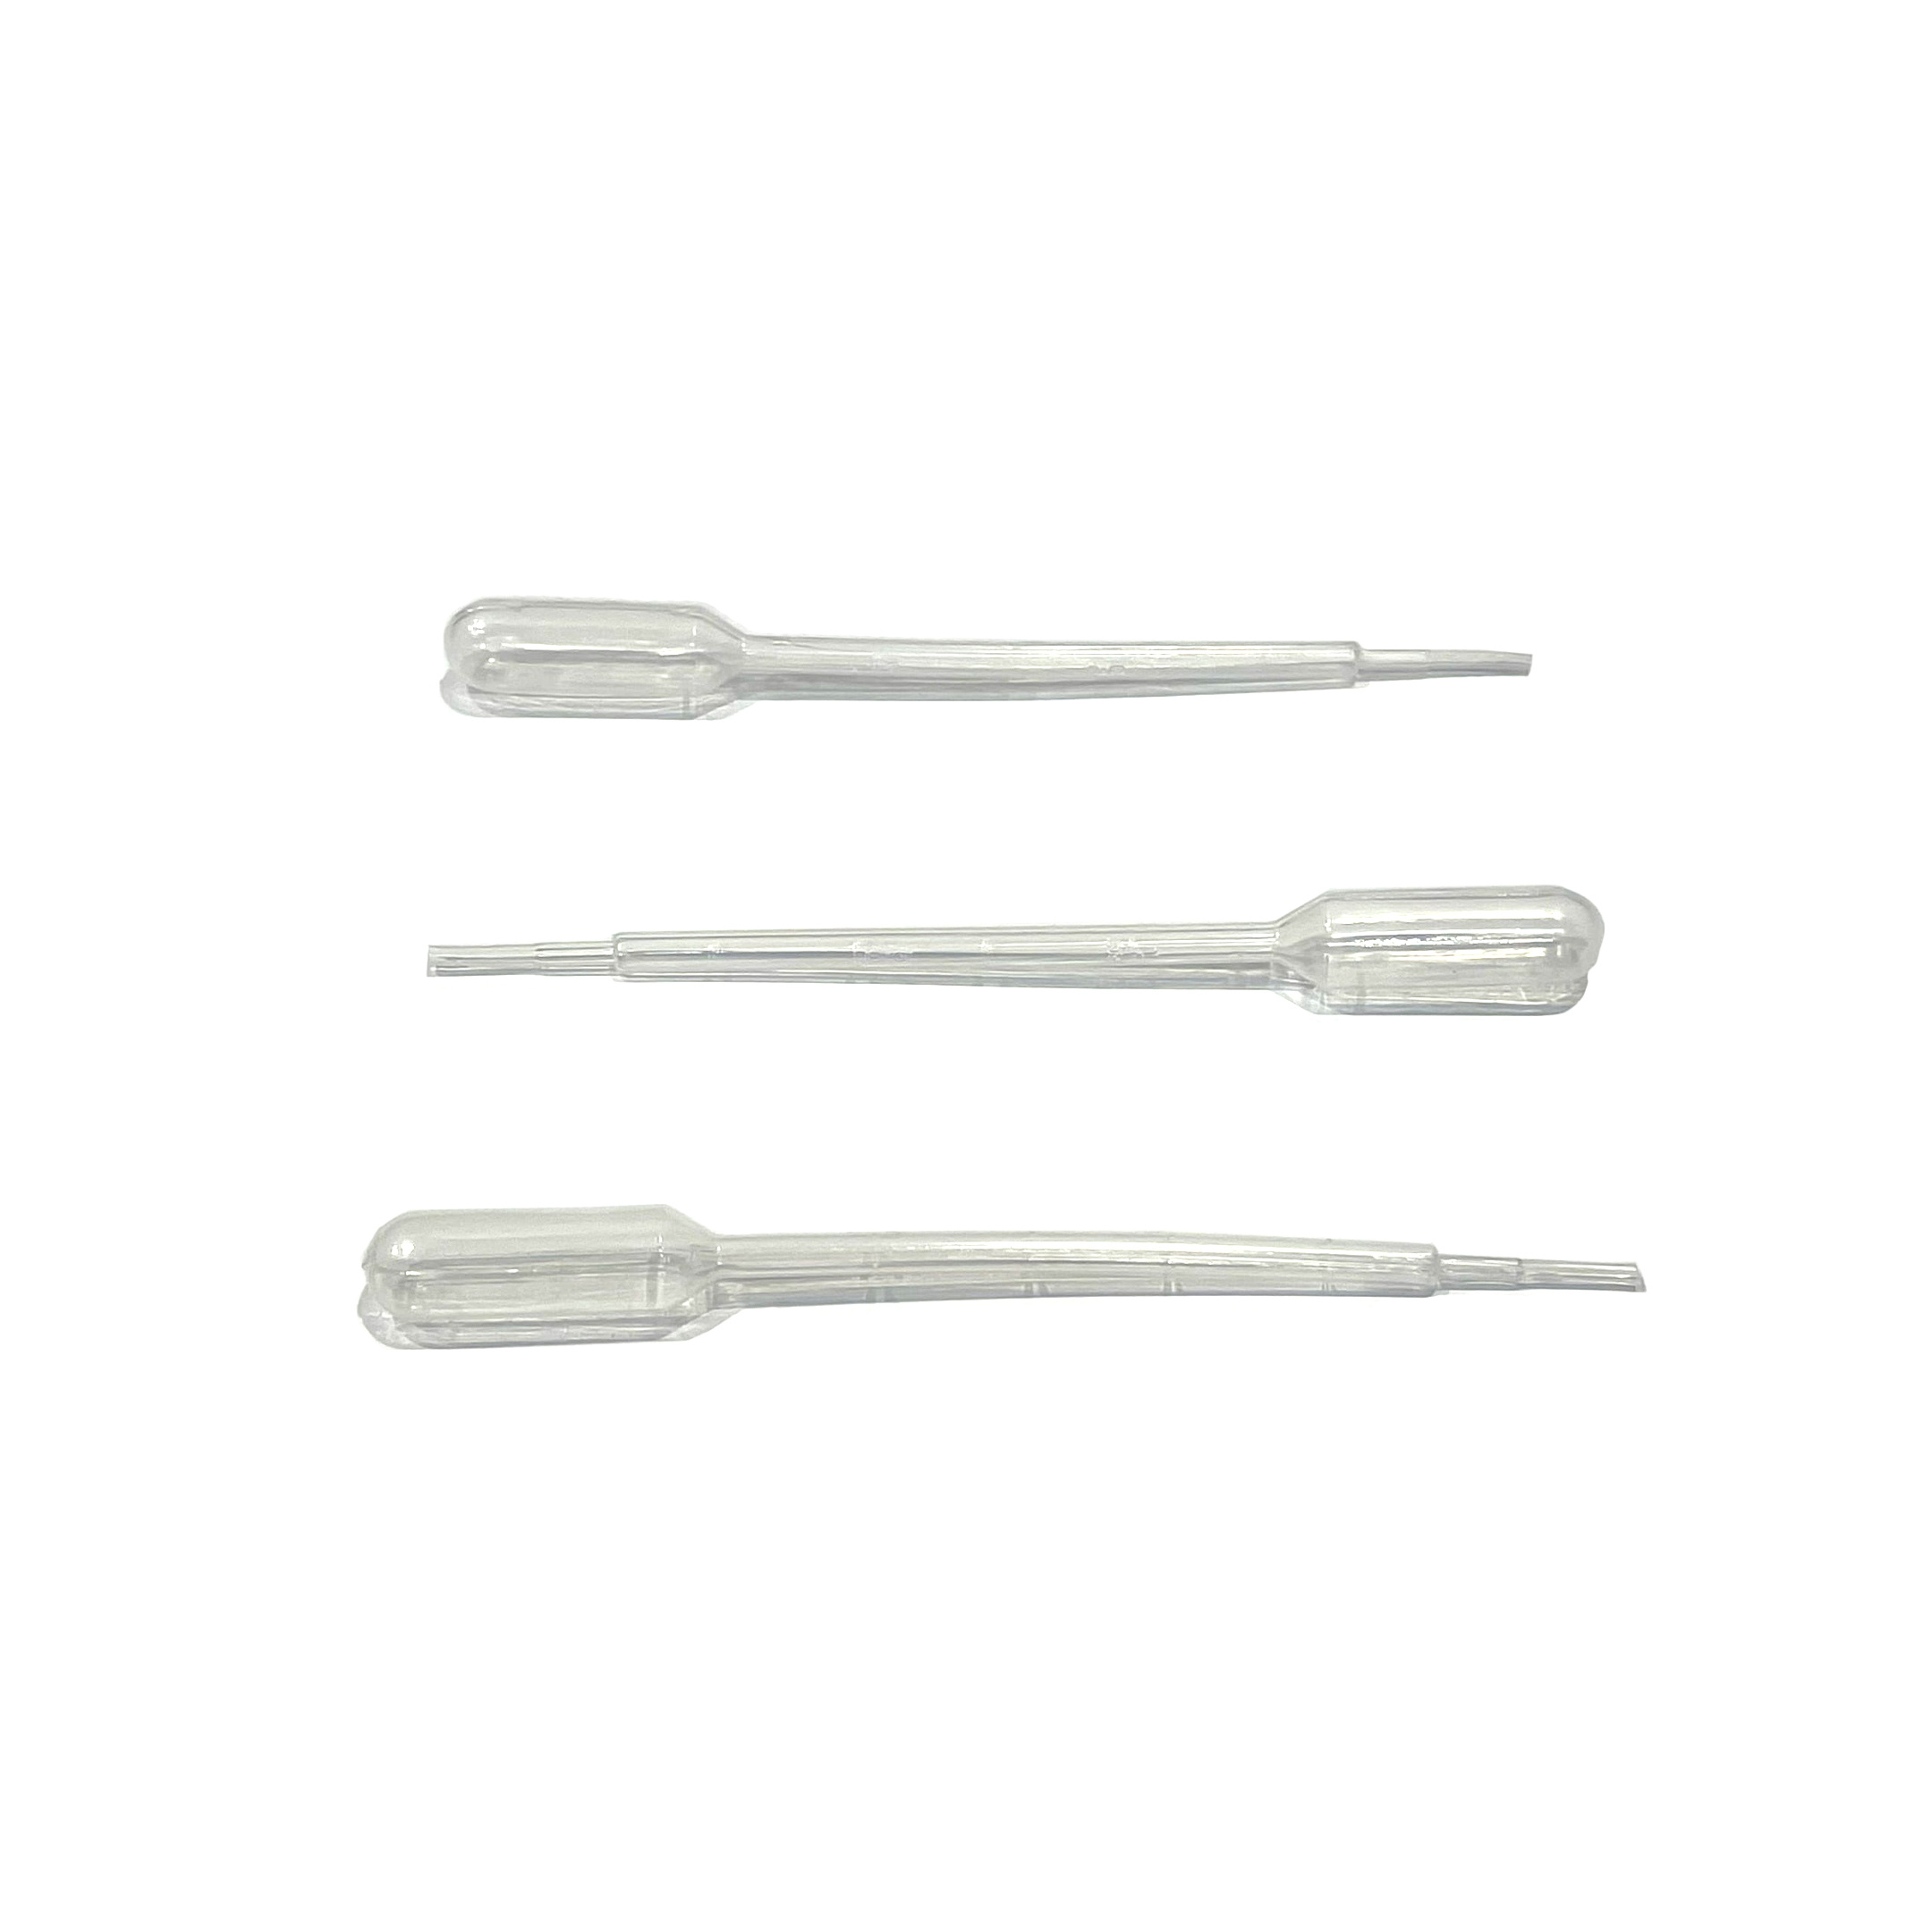 0751 MACHETE Pipettes of different sizes for modeling: 1 ml, 3 pcs.